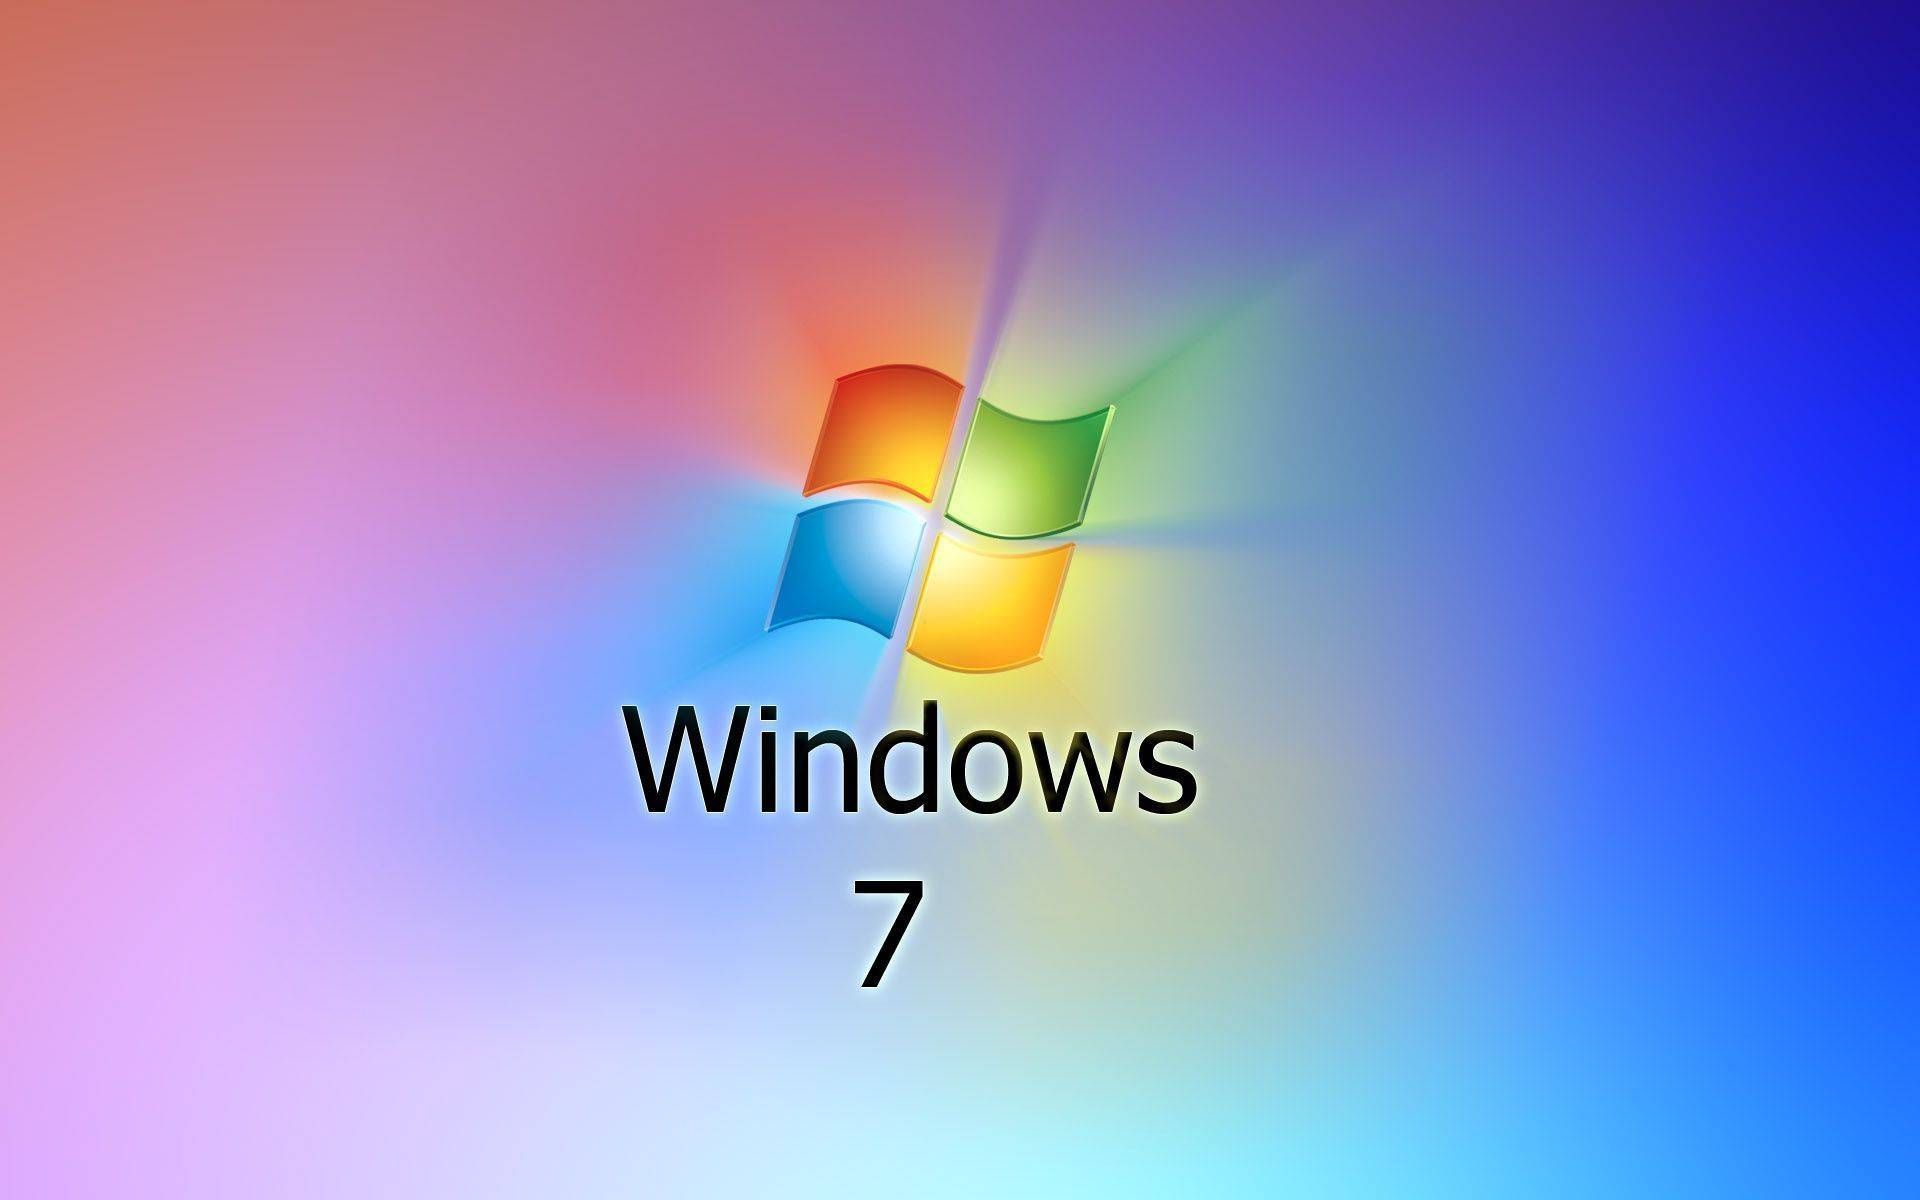 Windows 7 wallpapers free download